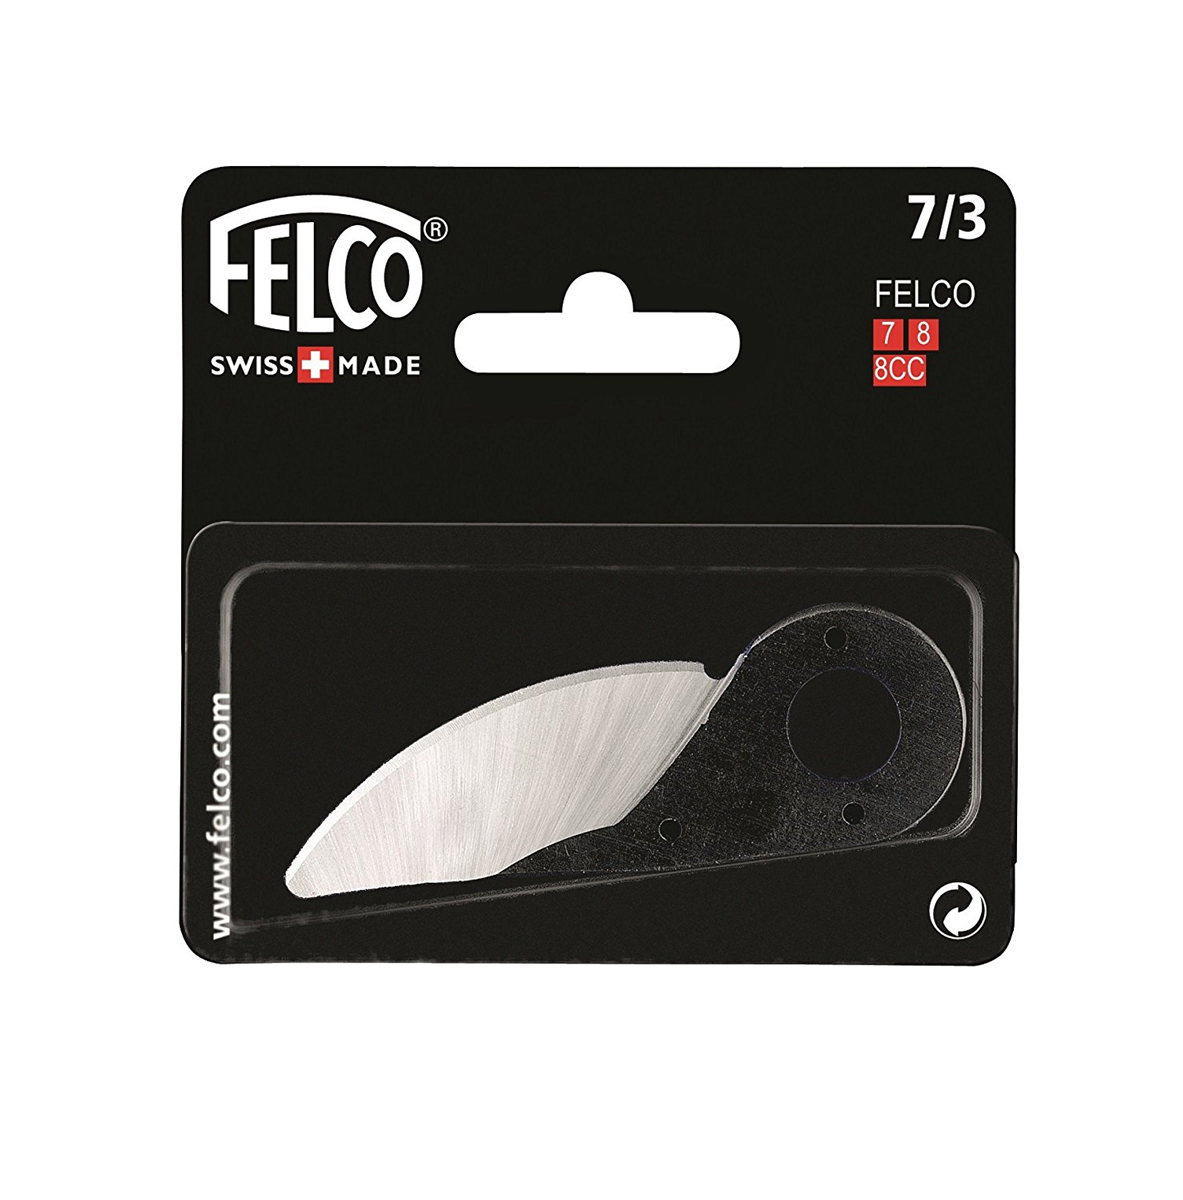 7-3 Cutting Blade for F 7 8 Felco - Knives, Pruners, & Shears